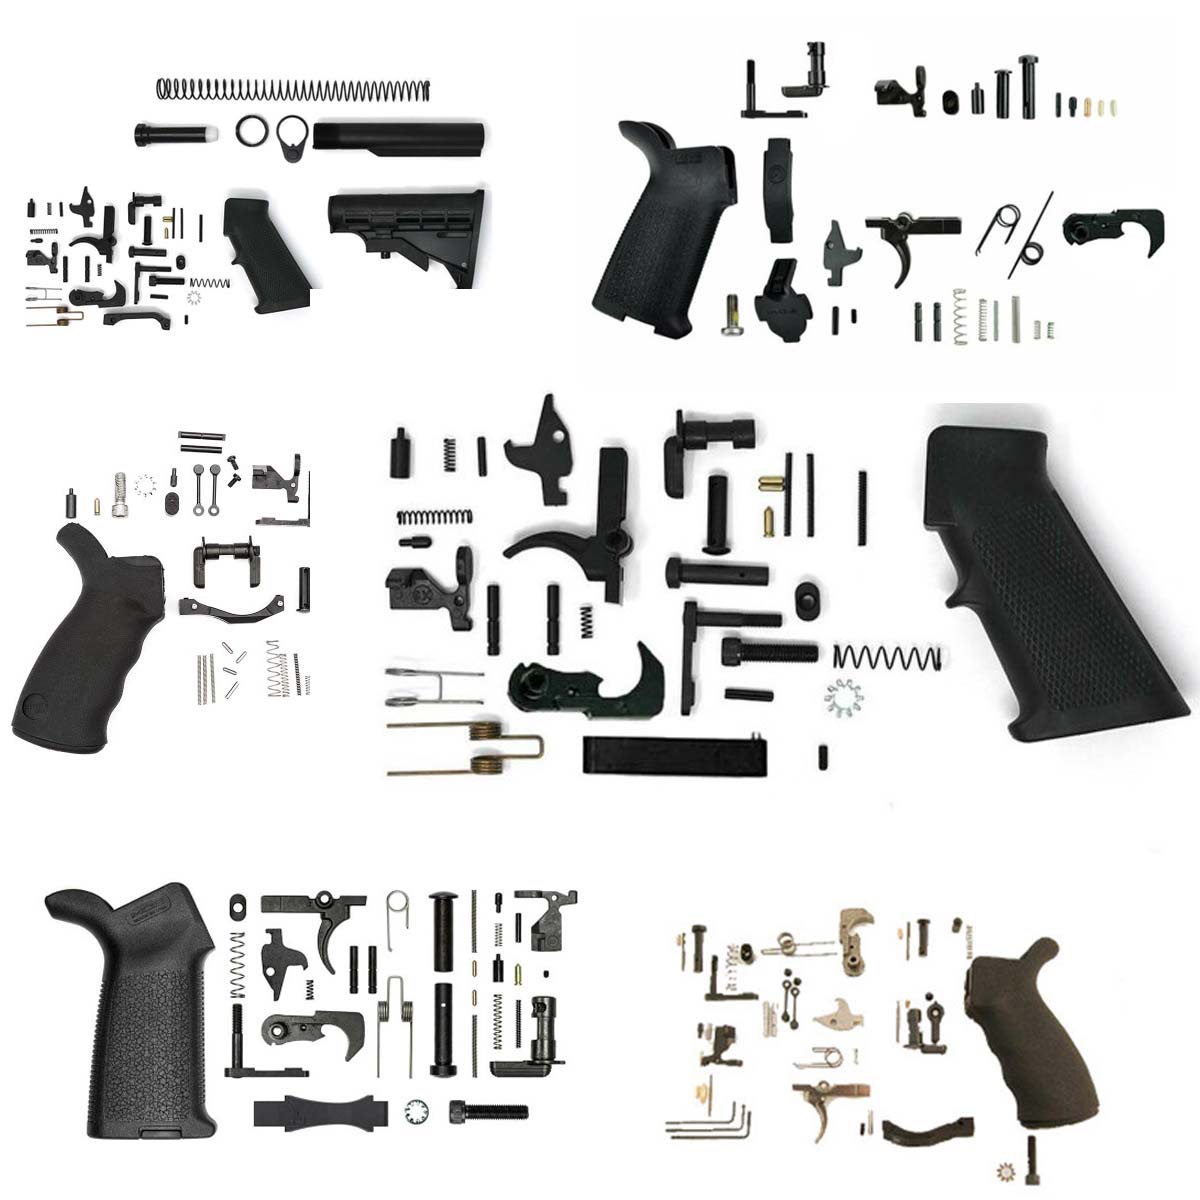 How to choose the best AR 15 lower parts kit for your build